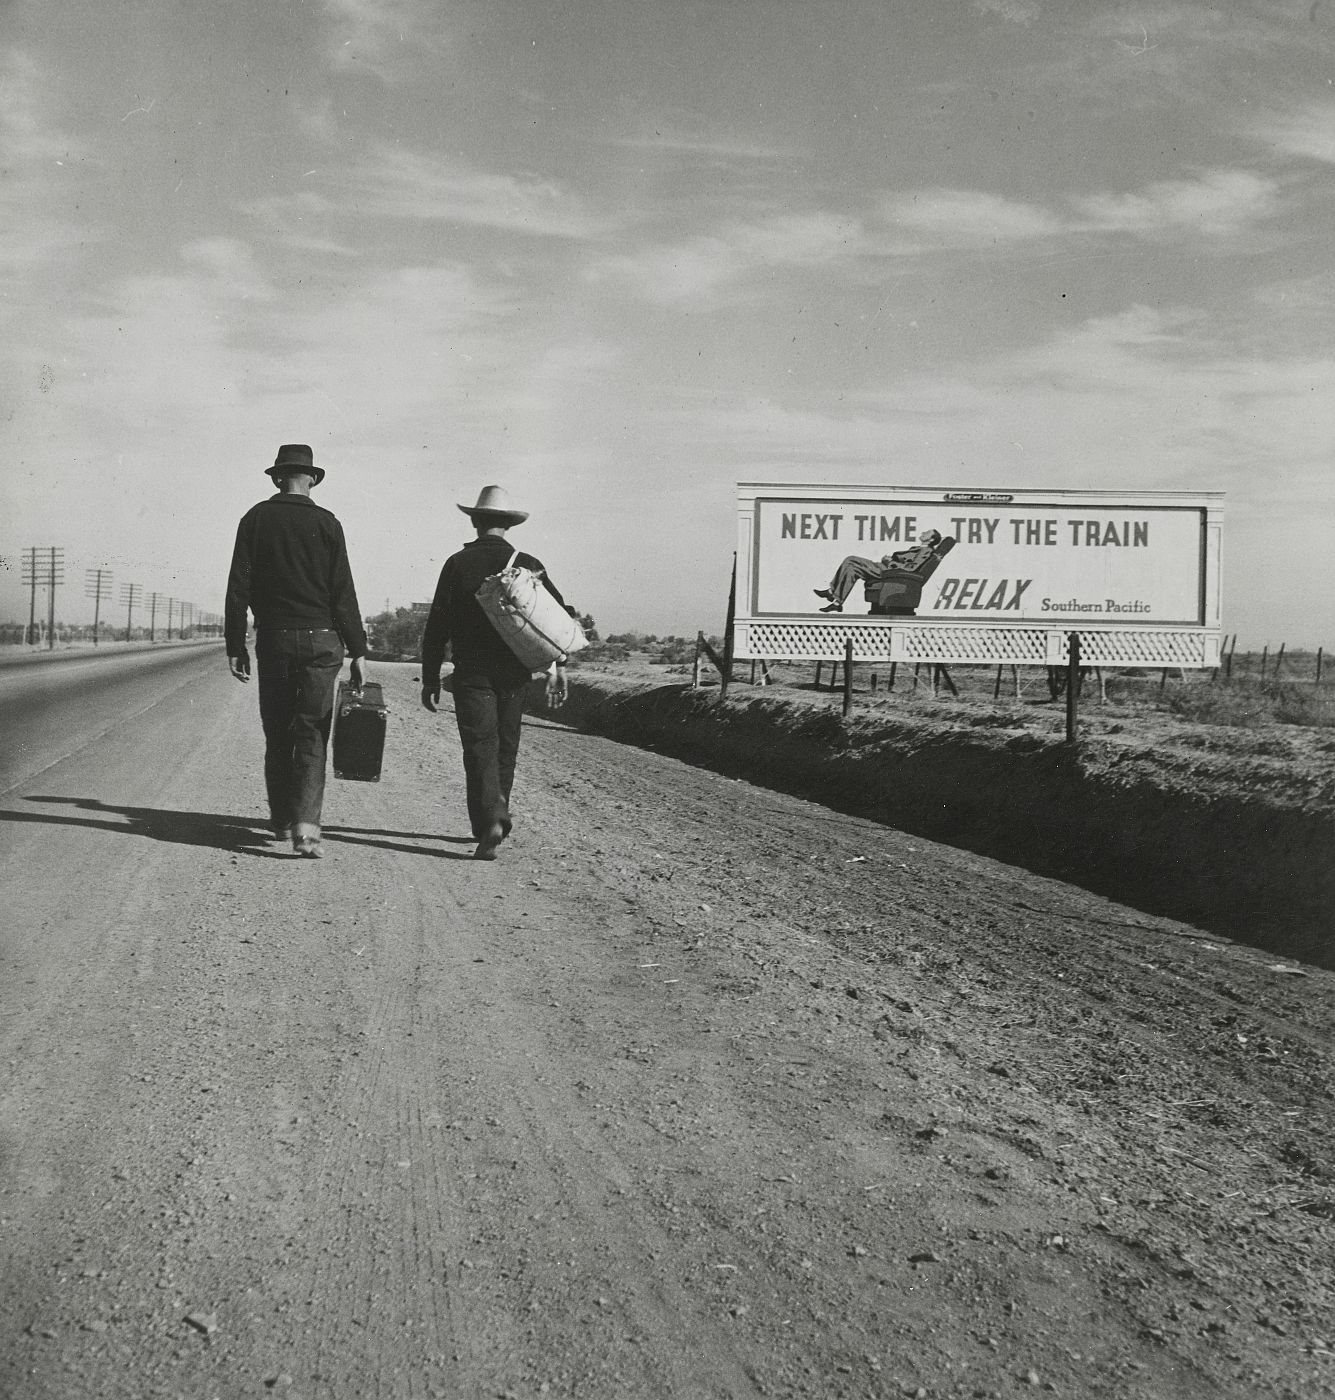 Dorothea Lange, "On the Road to Los Angeles, California". (1937)